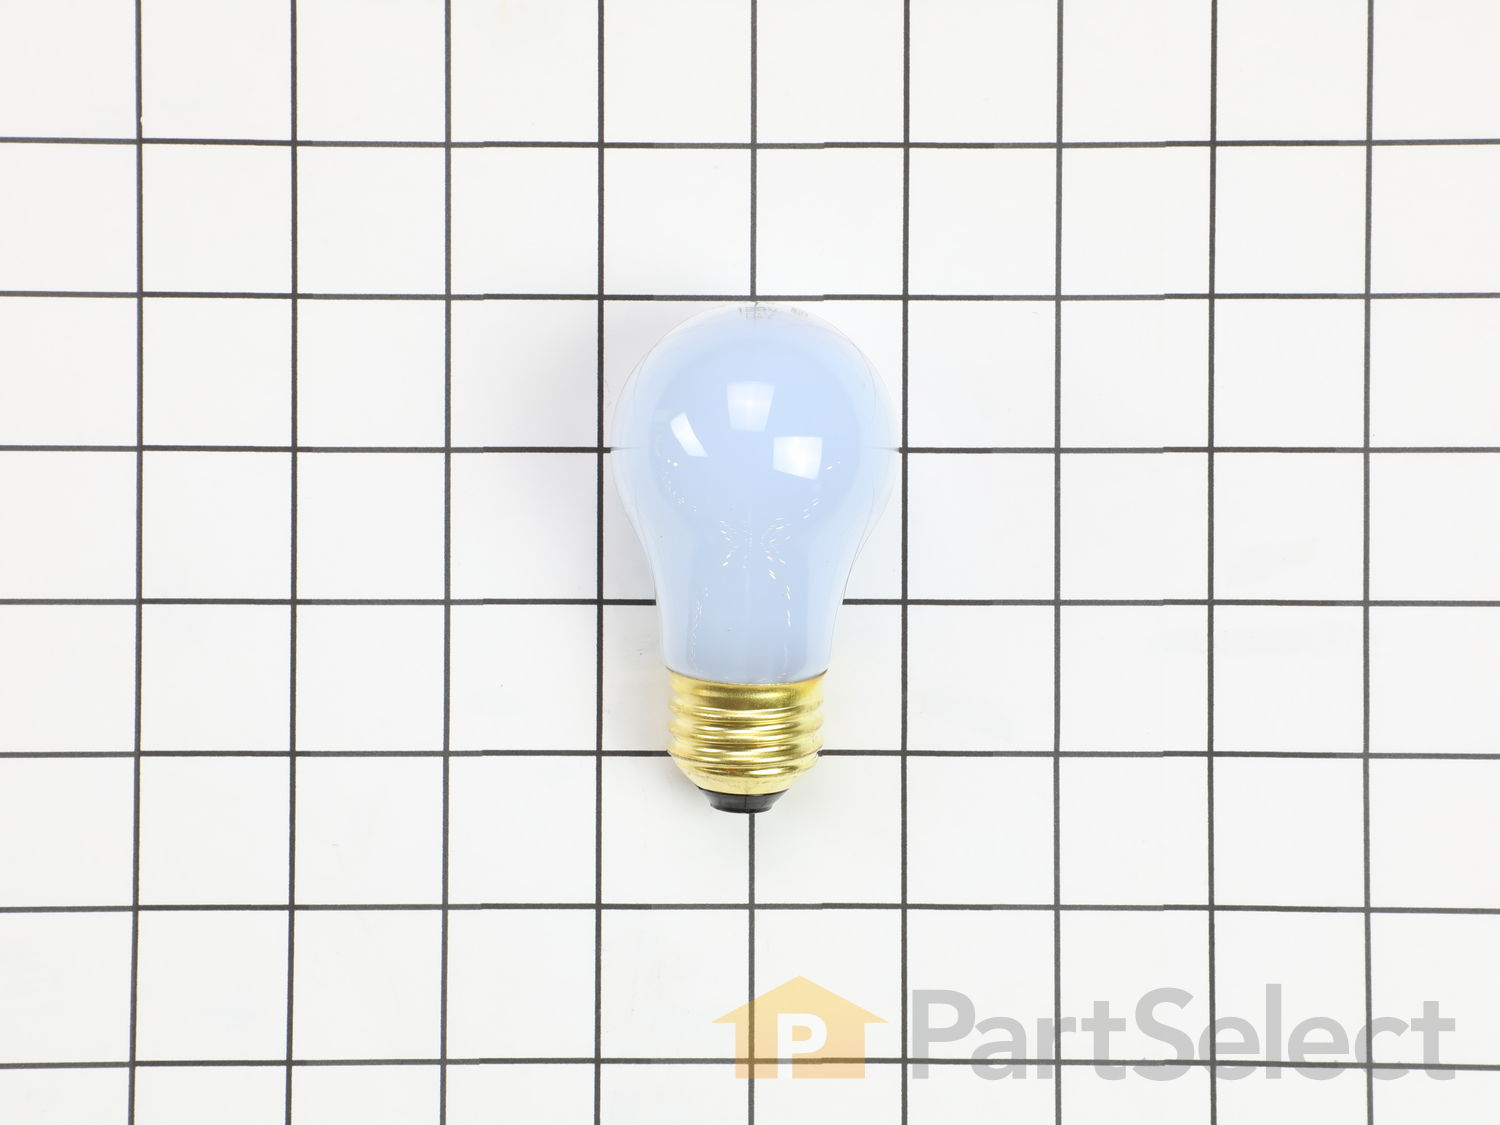 Electrolux Replacement Light Bulb For Refrigerator, Part